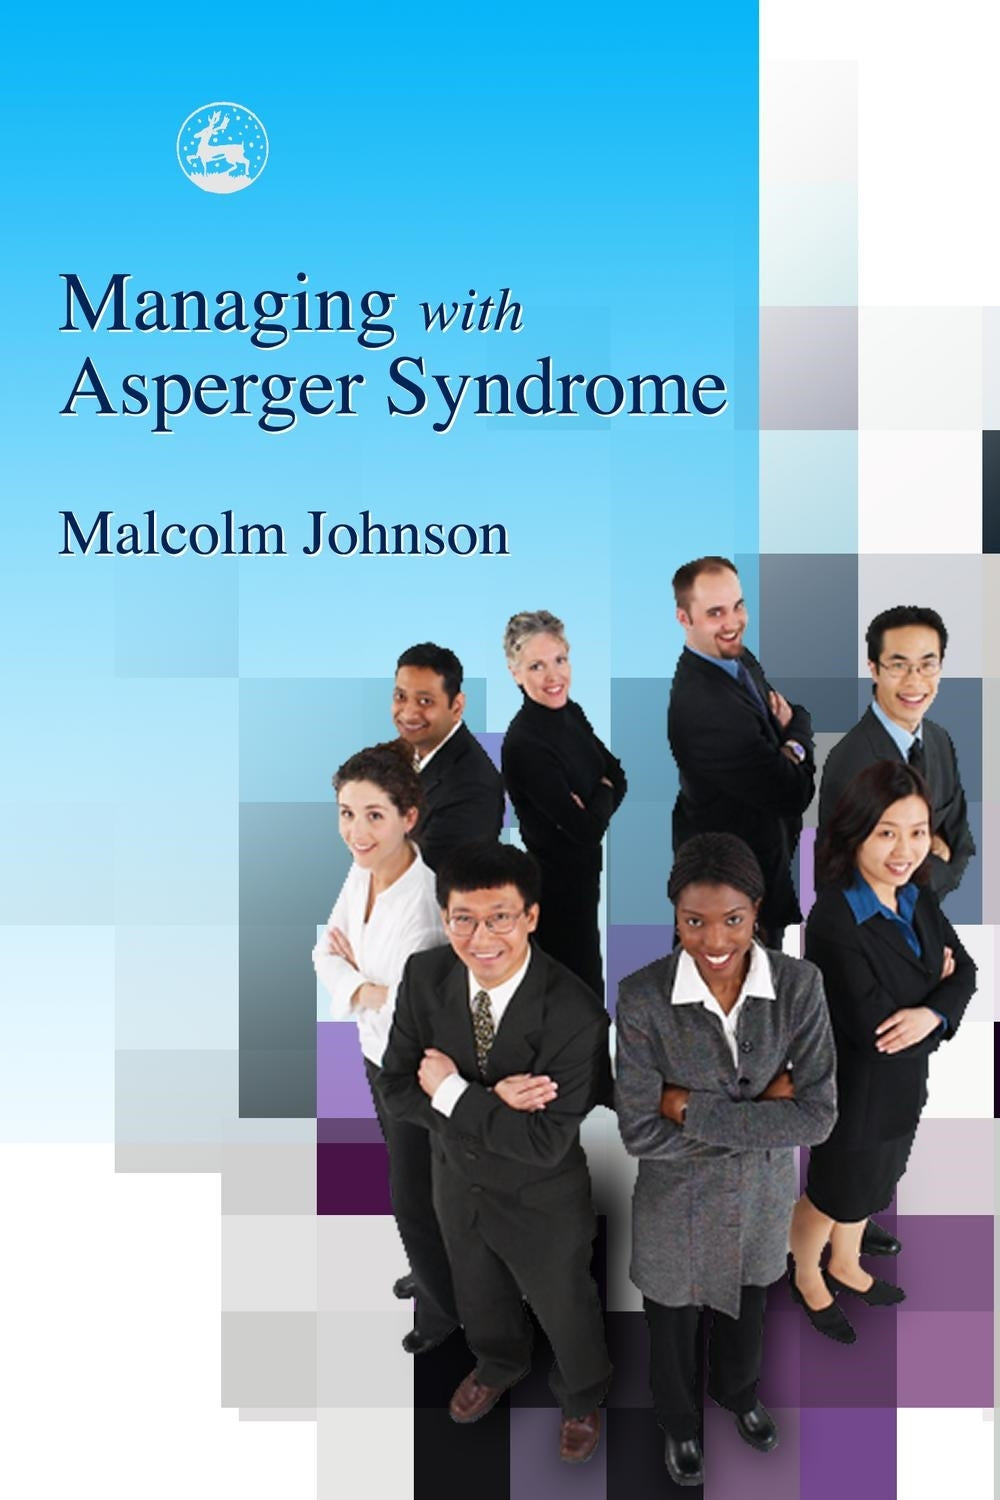 Managing with Asperger Syndrome by Malcolm Johnson